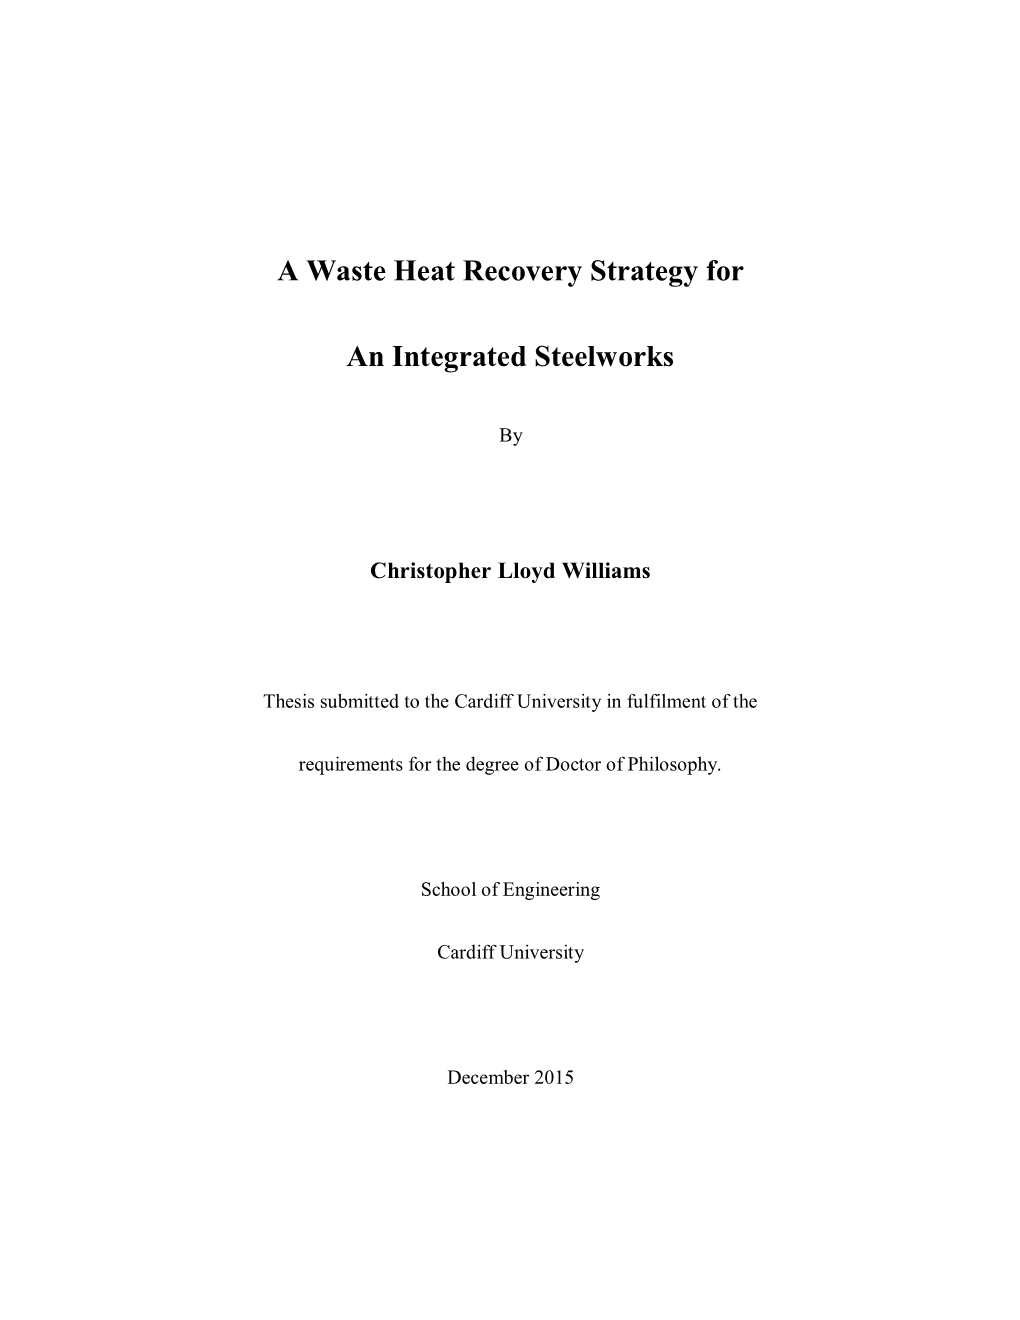 A Waste Heat Recovery Strategy for an Integrated Steelworks